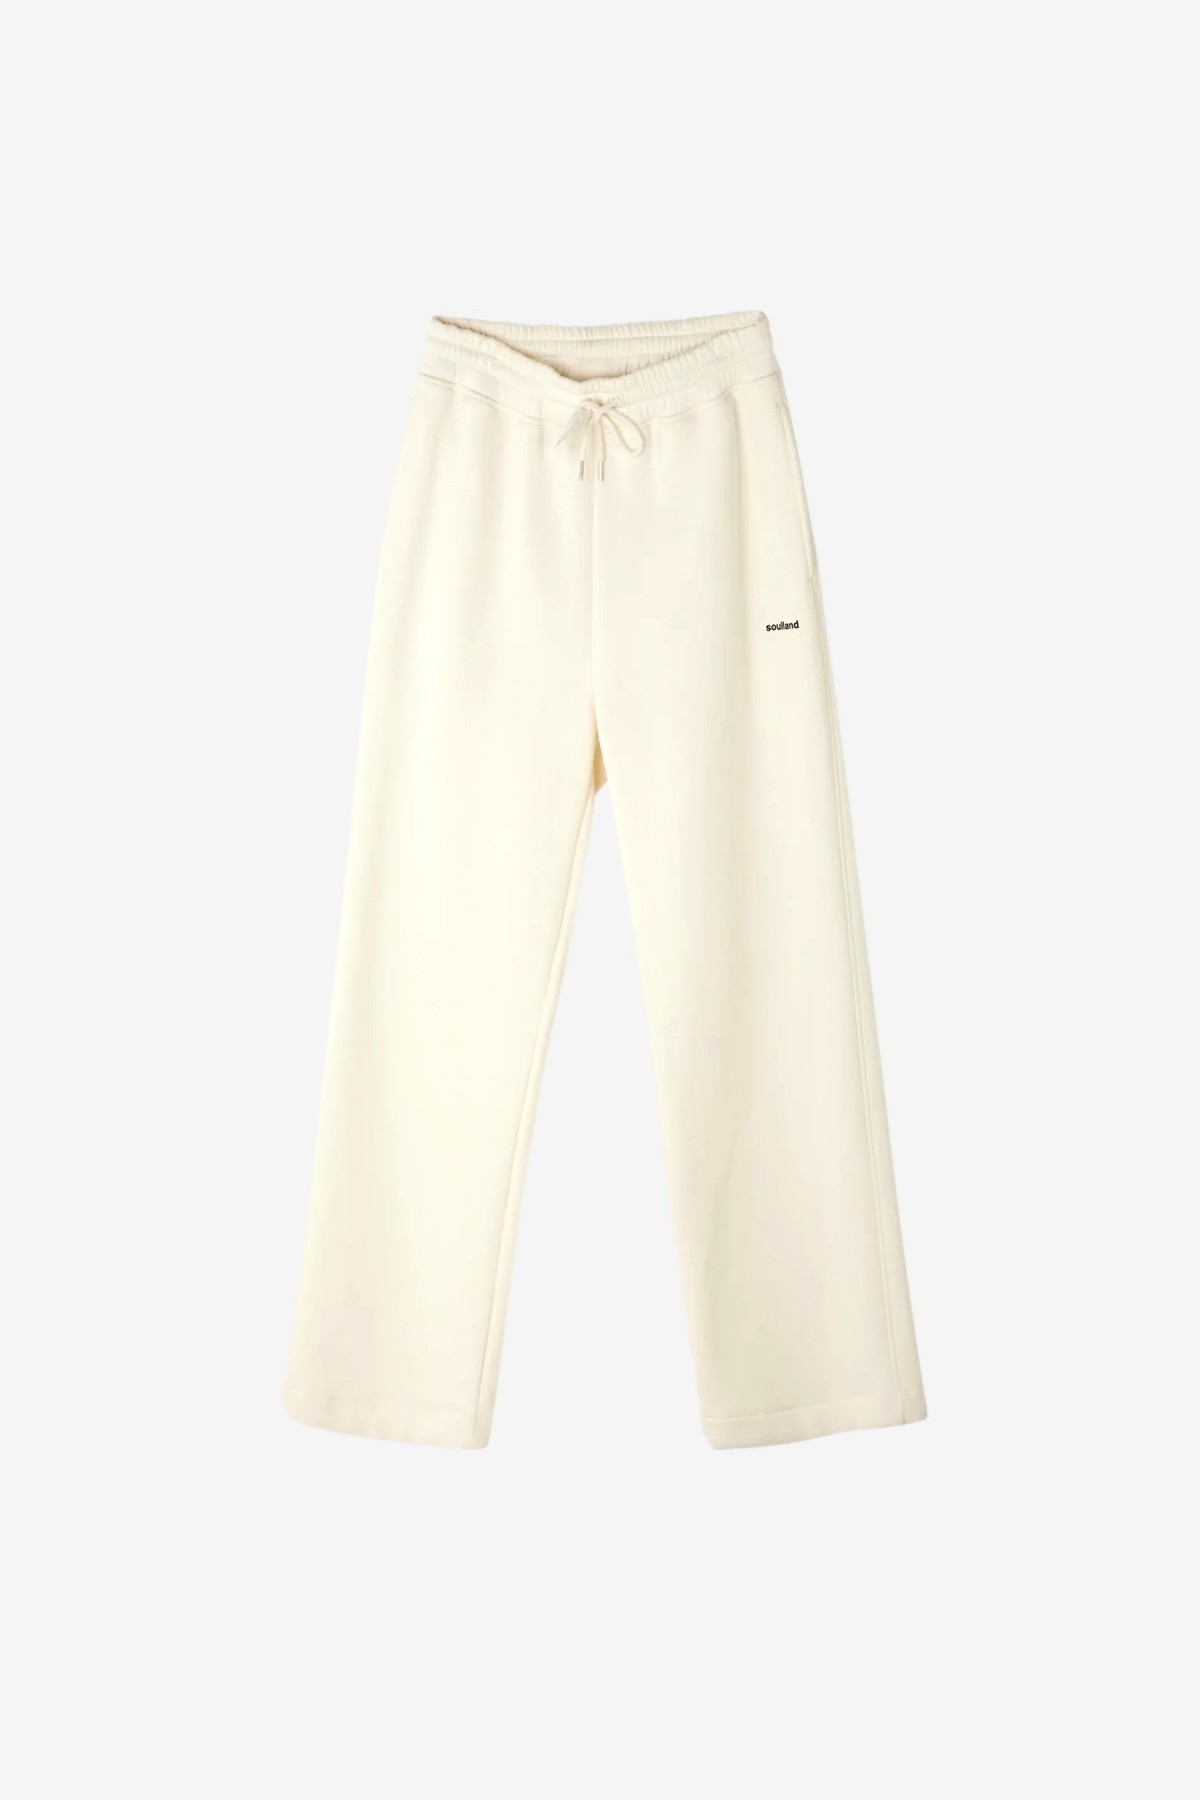 Soulland Ada Pants in Off White